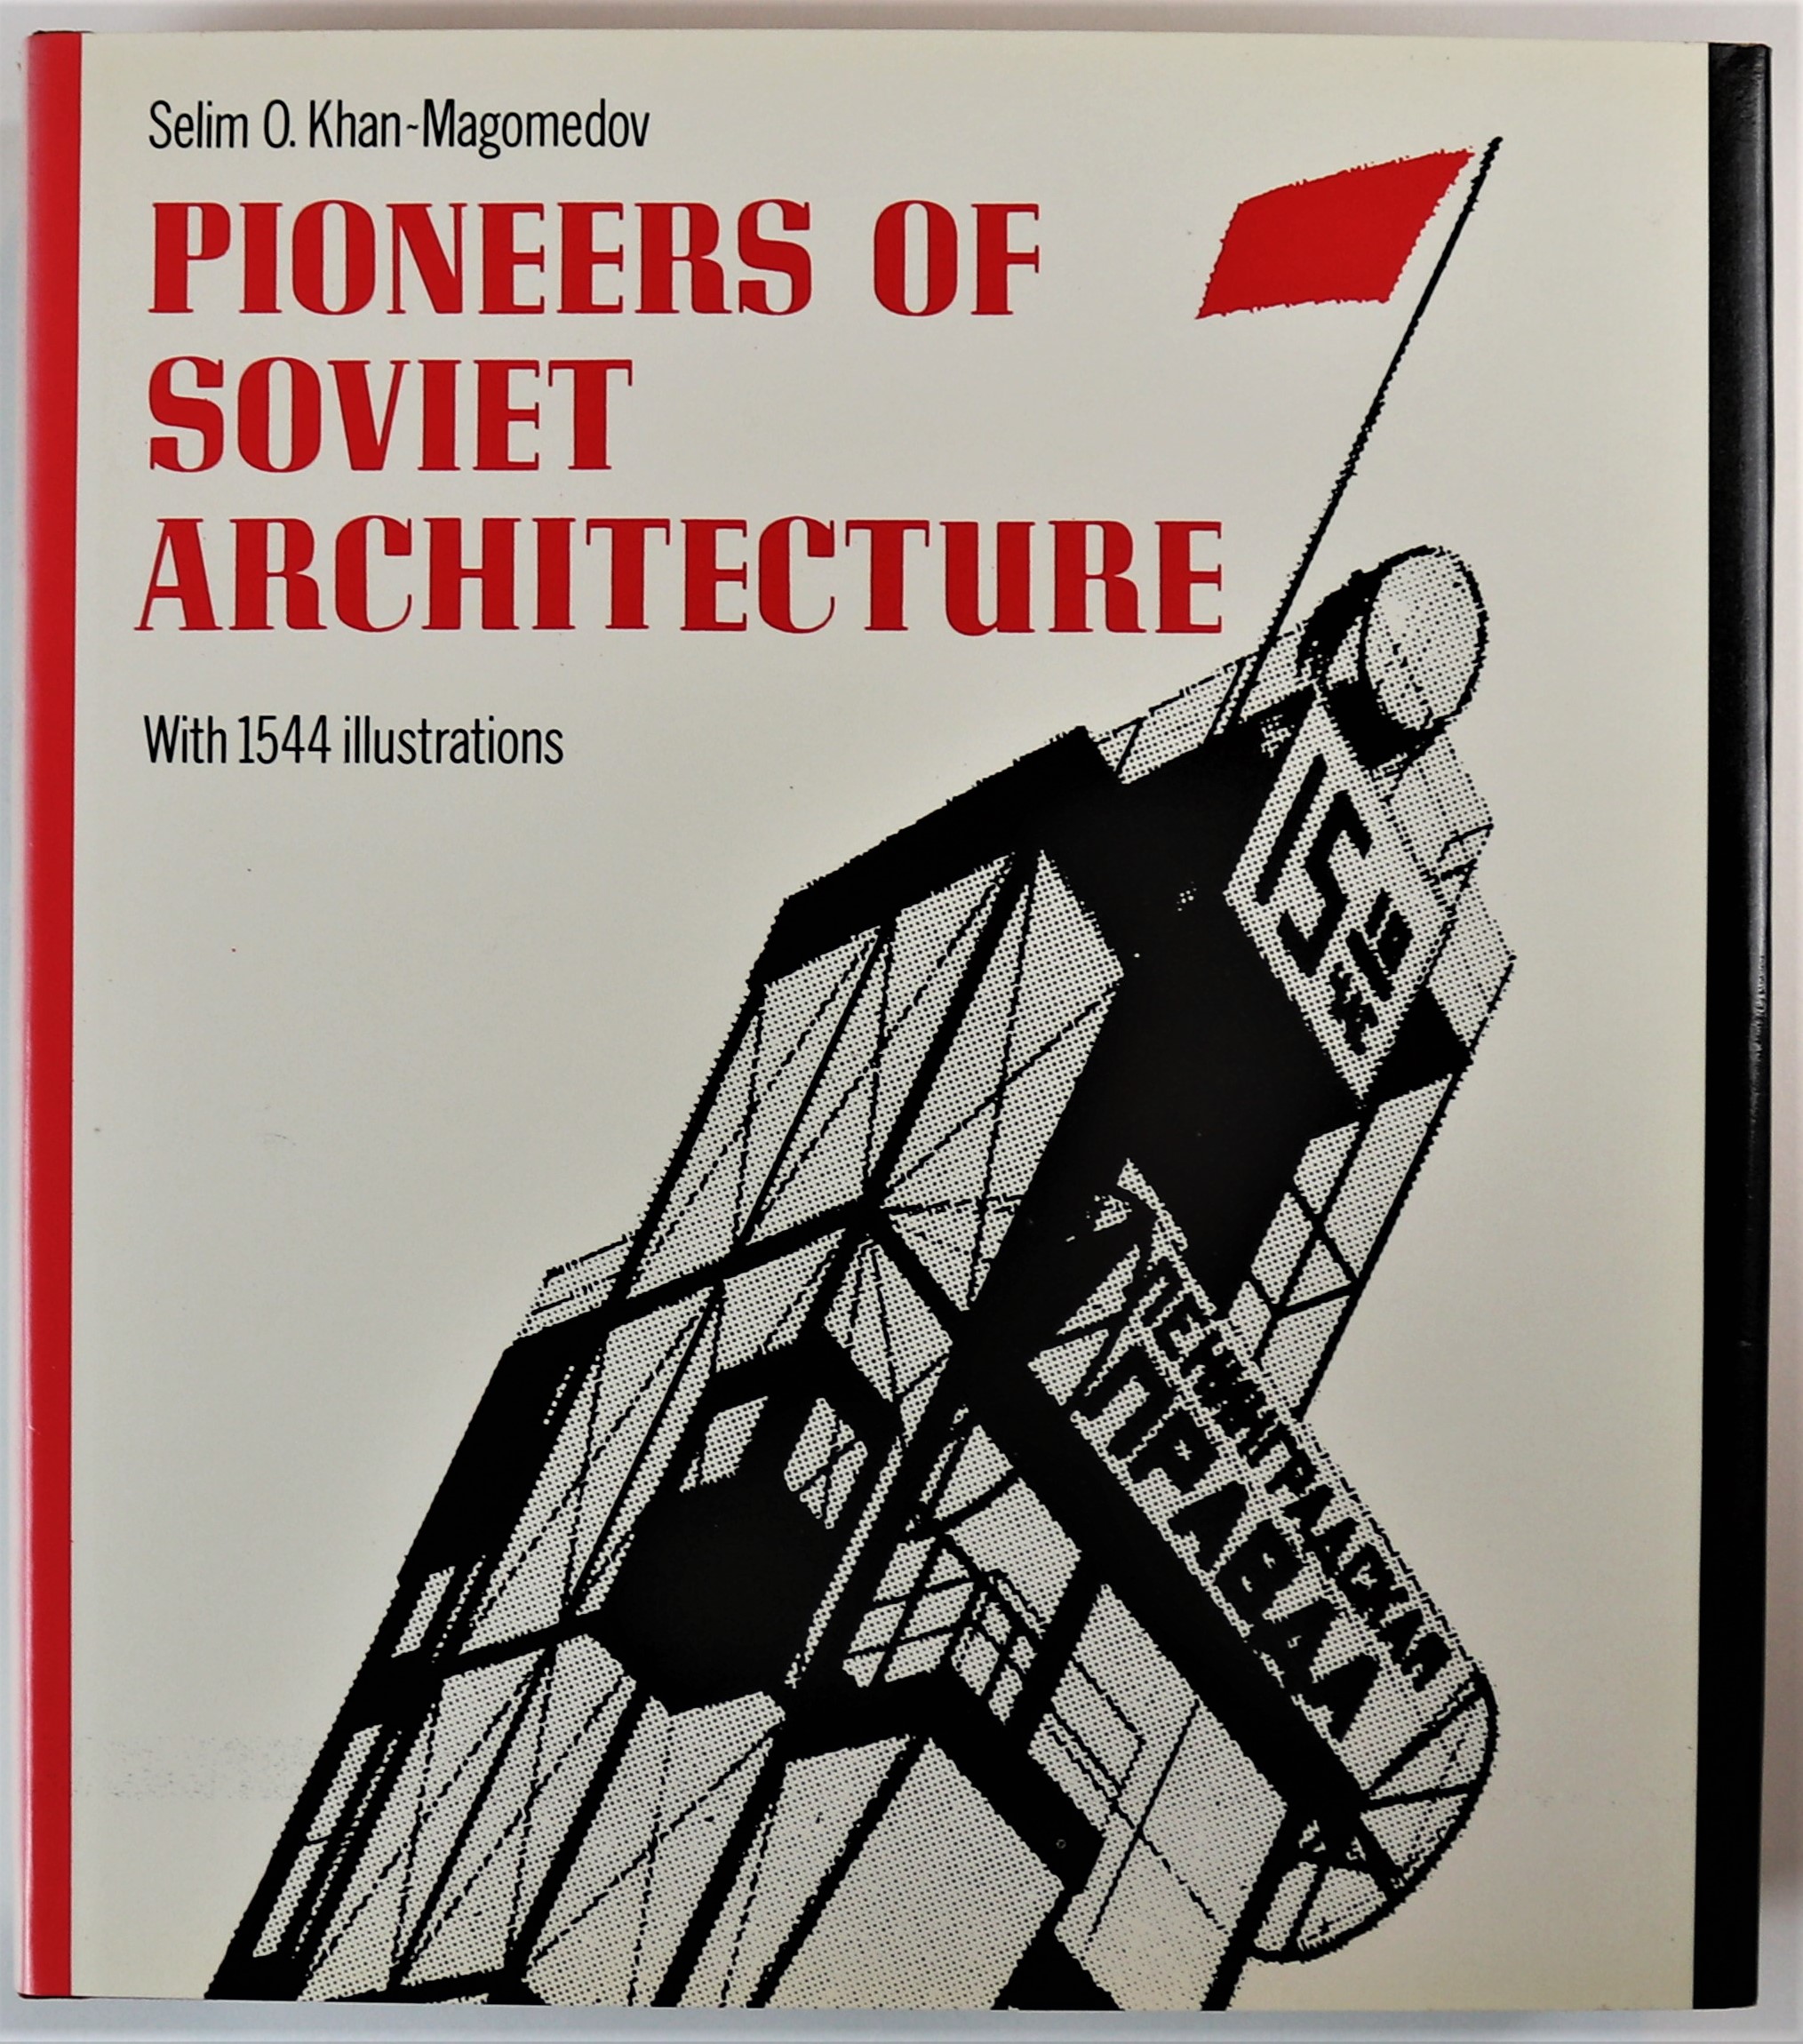 Pioneers of Soviet Architecture The Search for New Solutions in the 1920's and 1930's 1st UK Edition - Khan-Magomedov, Selim O.; Lieven, Alexander (translator)